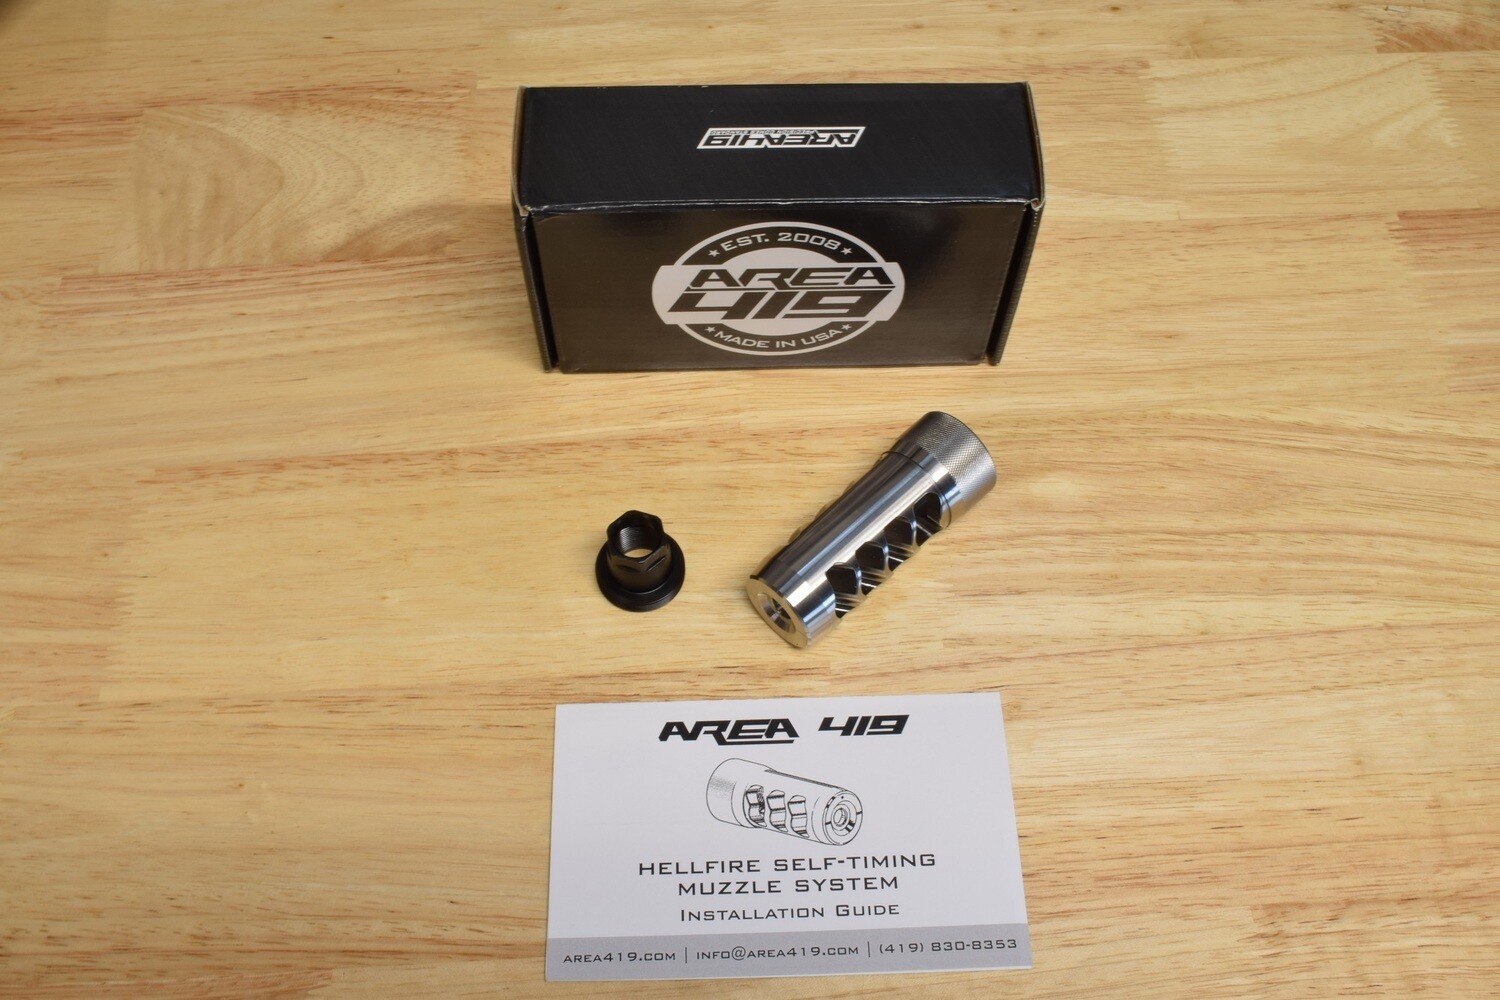 AREA419 Hellfire Match 6.5mm Self Timing Stainless Muzzle Brake